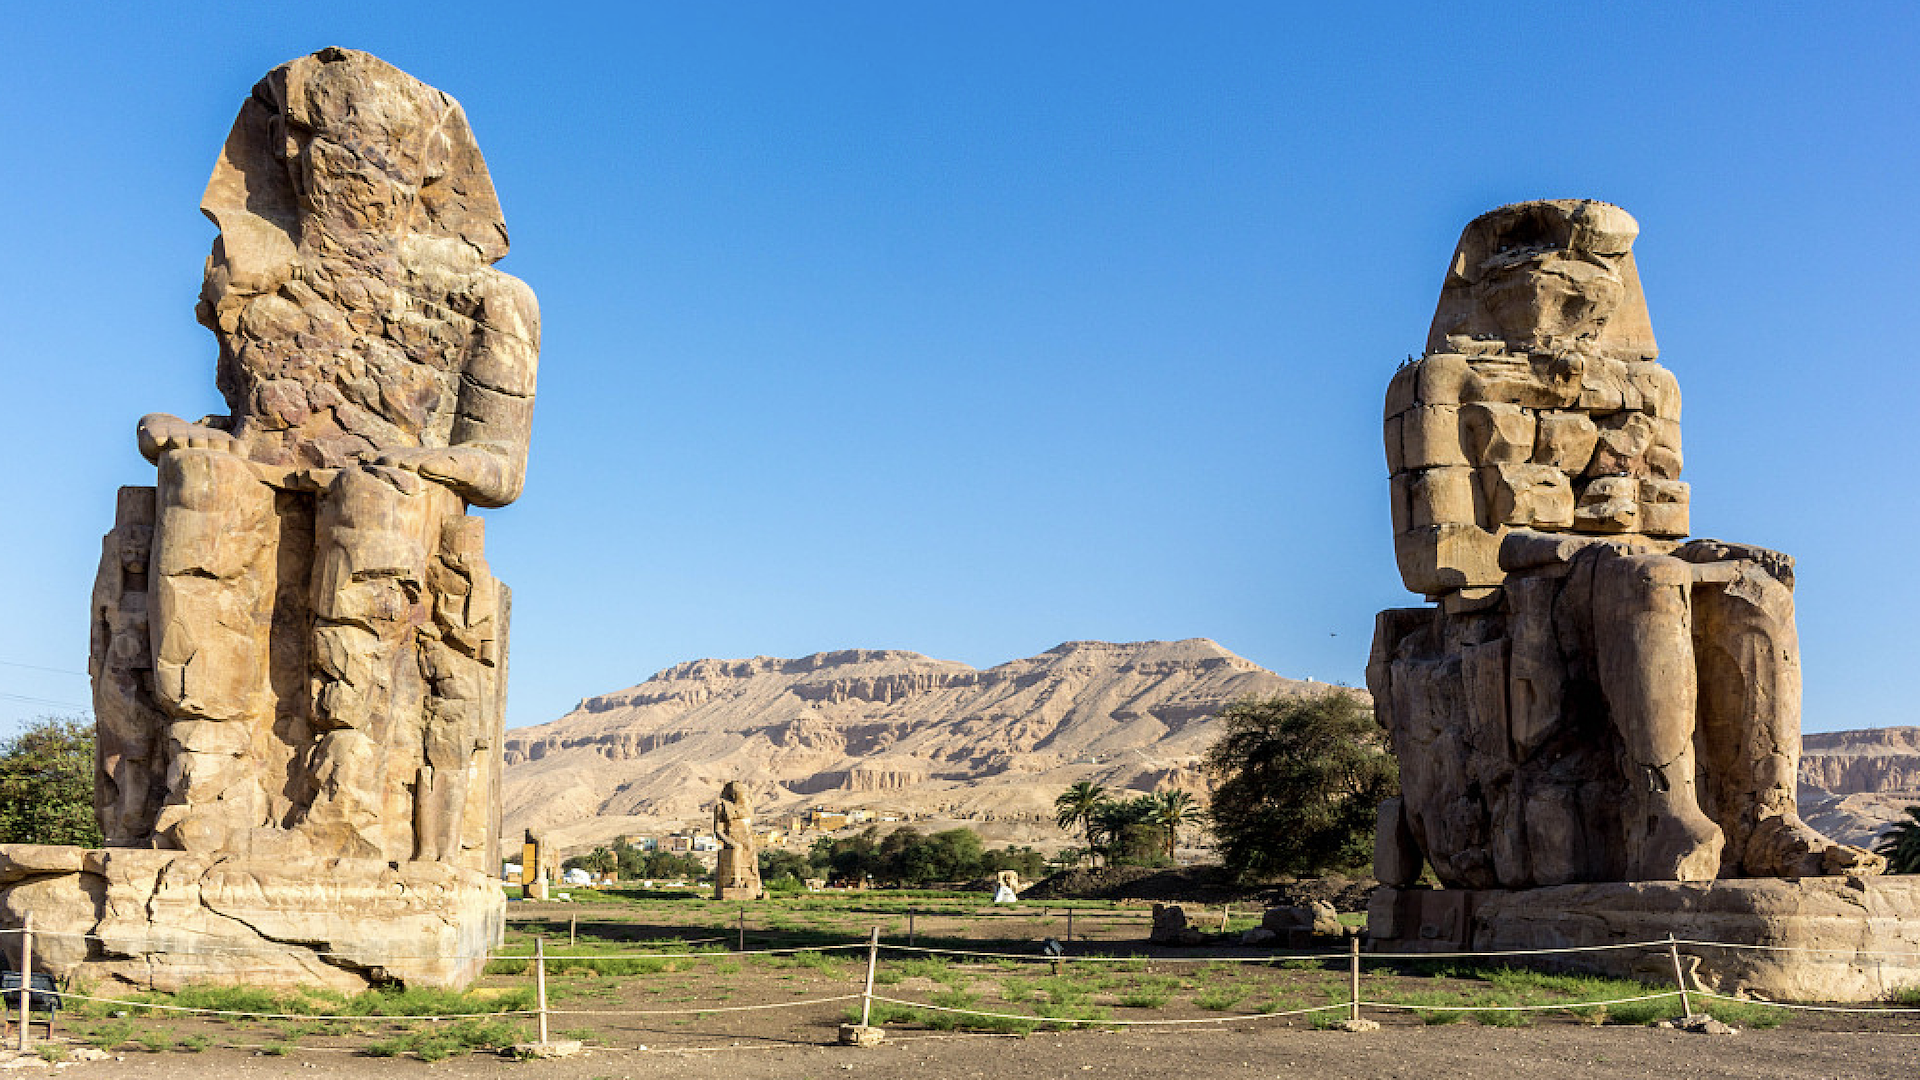 The Colossi of Memnon, two monumental statues representing Amenhotep III of the 18th Dynasty of Egypt /CFP